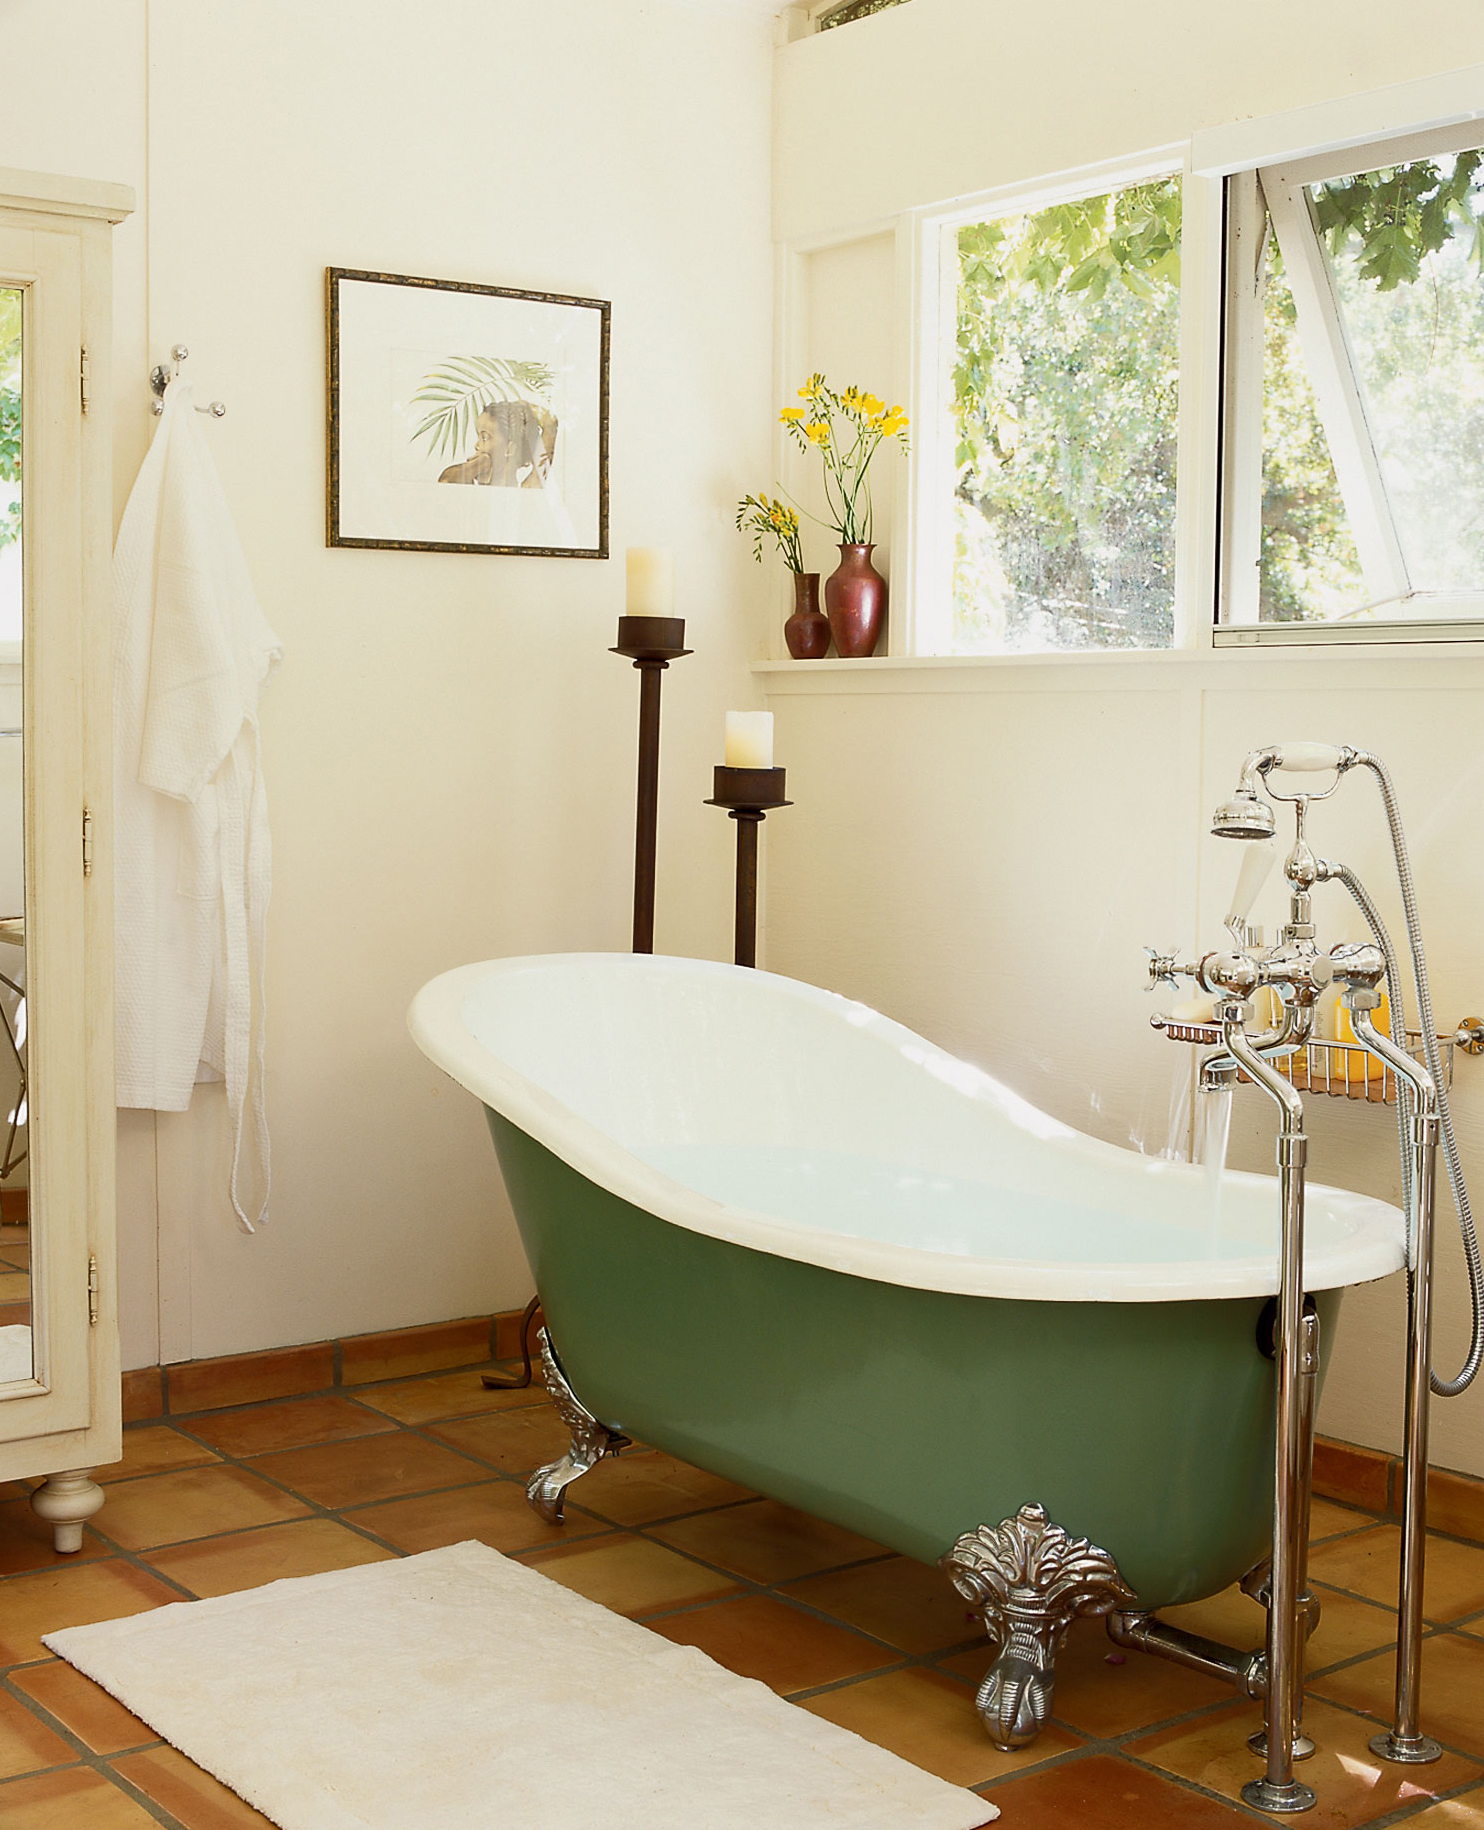 DIY Bathtub Painting: A Step-By-Step Guide to a New Look